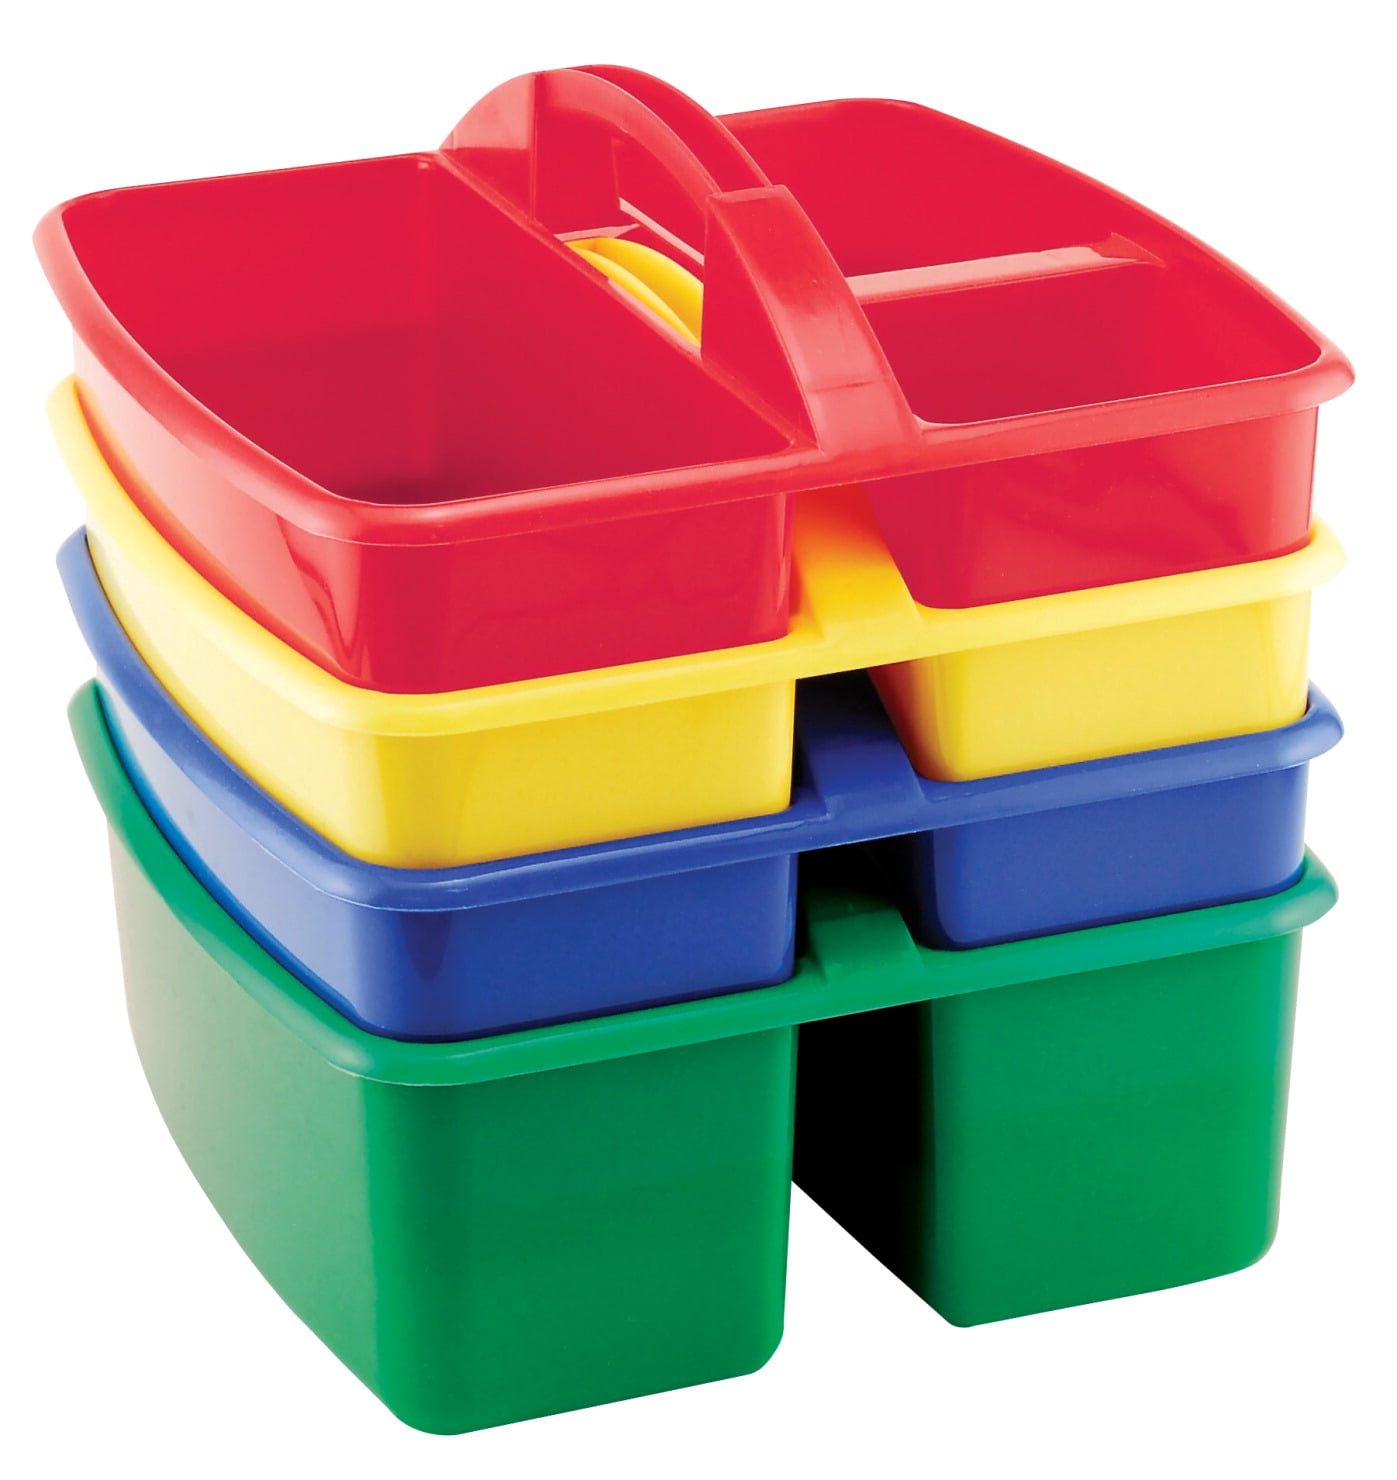 Kids Arts & Crafts Small Plastic Caddies with Handles 3 Compartments Assorted Colors 4-ct Set 